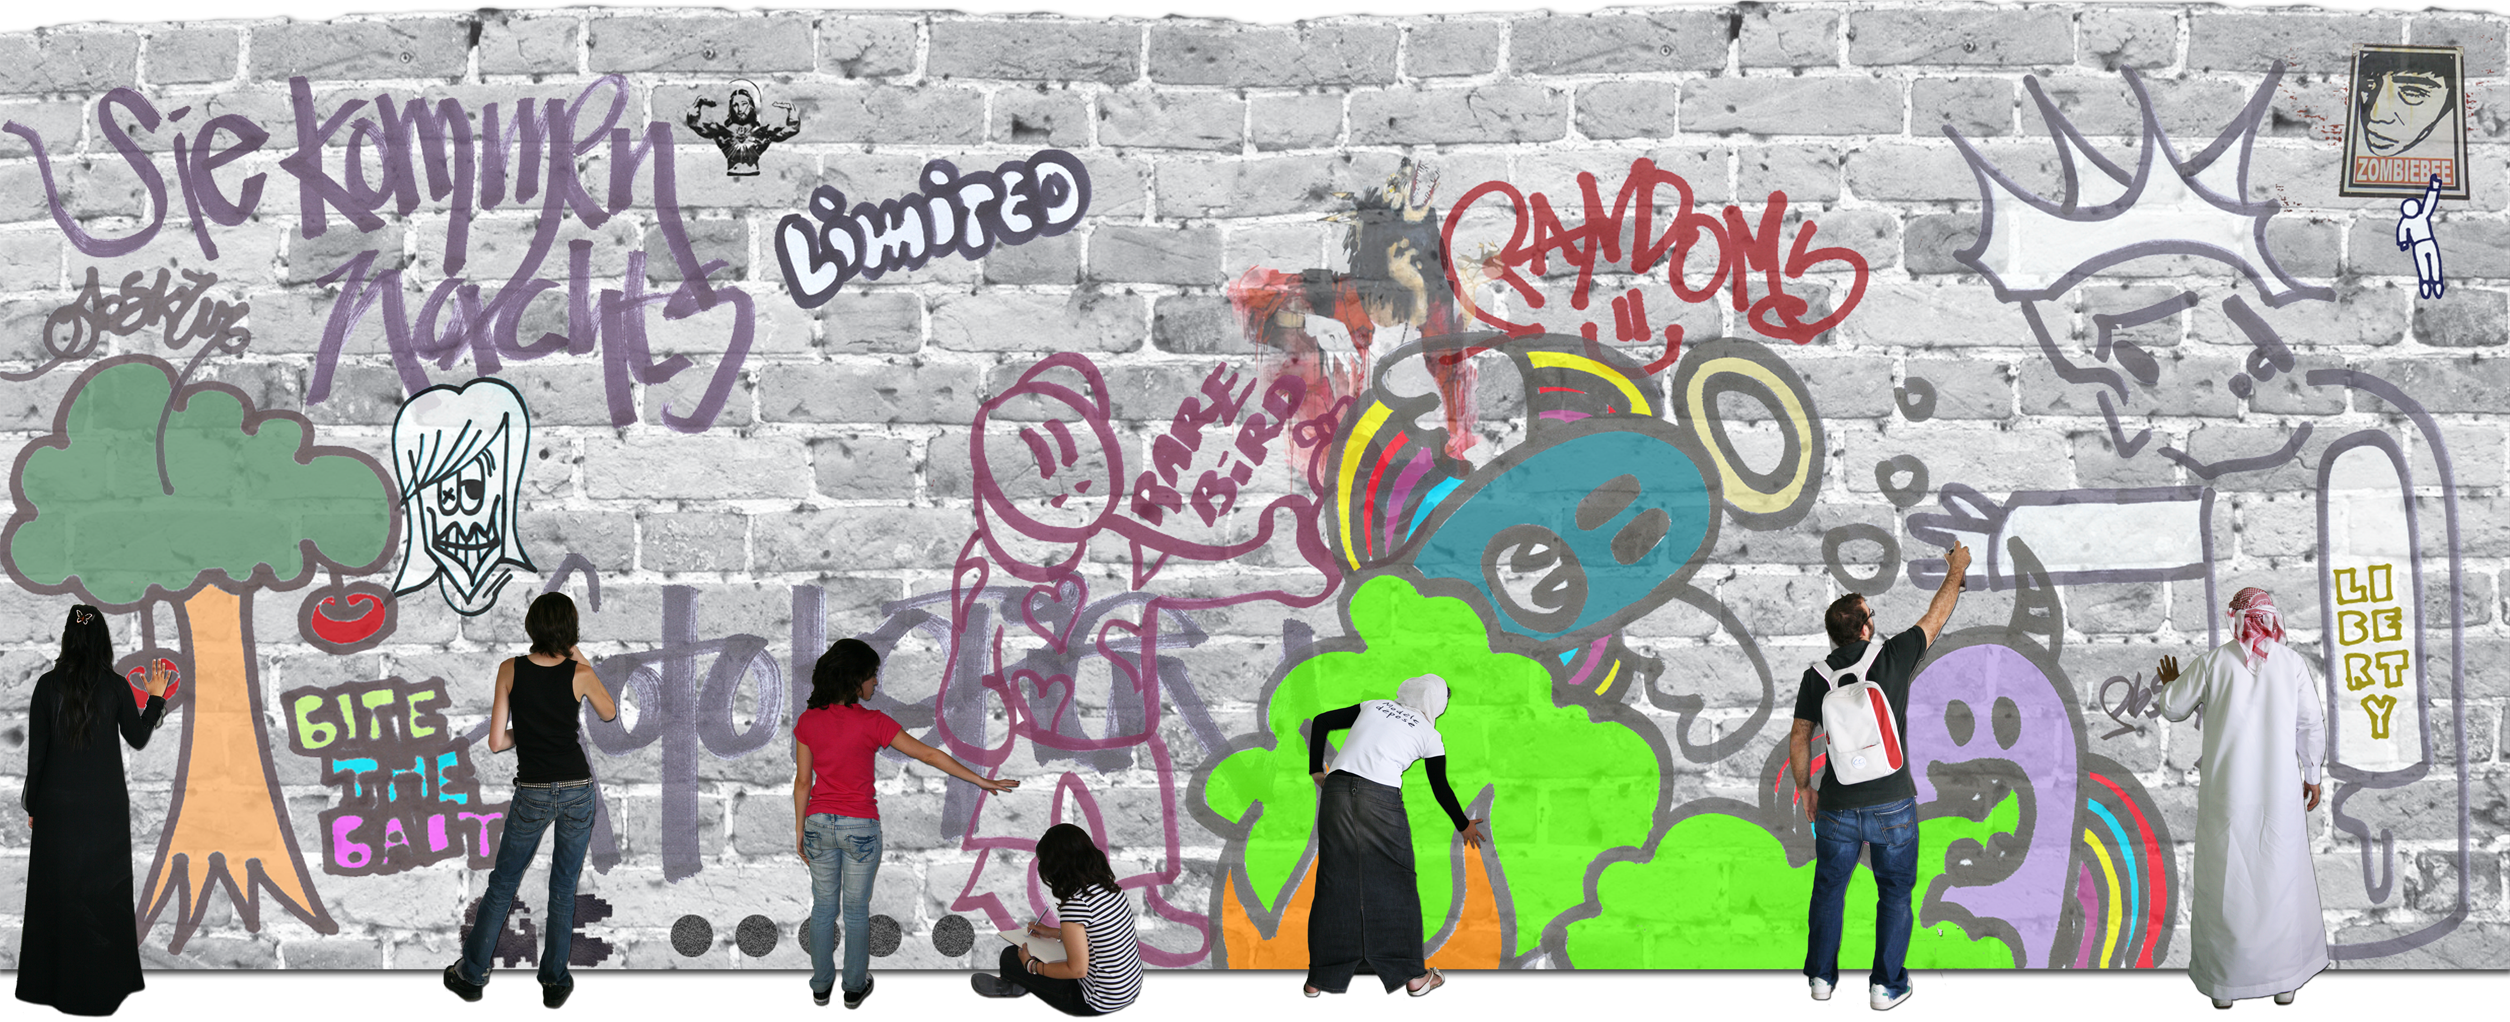 Berlin Wall. By Obskuritee Berlin Wall. By Obskuritee - Berlin Wall, Transparent background PNG HD thumbnail